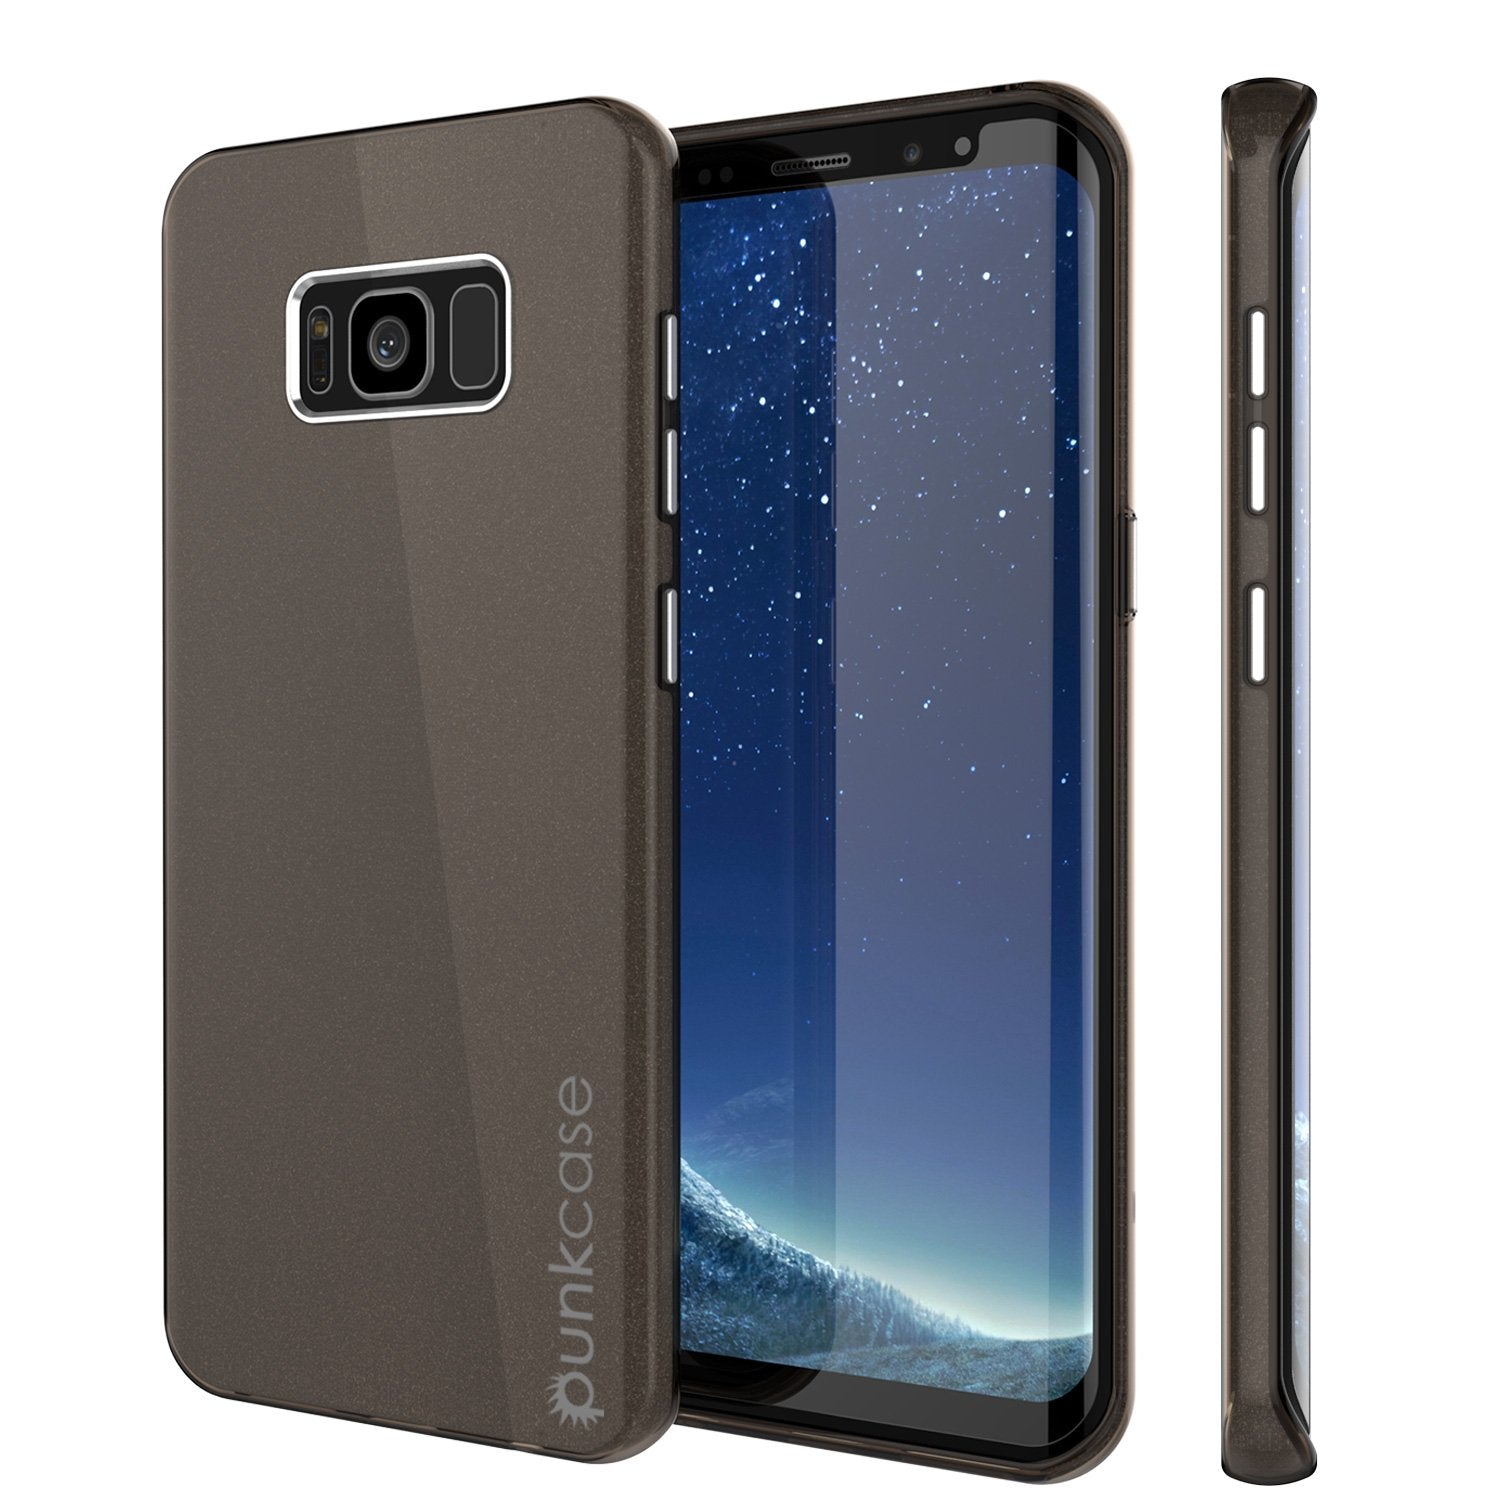 Galaxy S8 Plus Case, Punkcase Galactic 2.0 Series Ultra Slim Protective Armor TPU Cover [Black] (Color in image: black/grey)